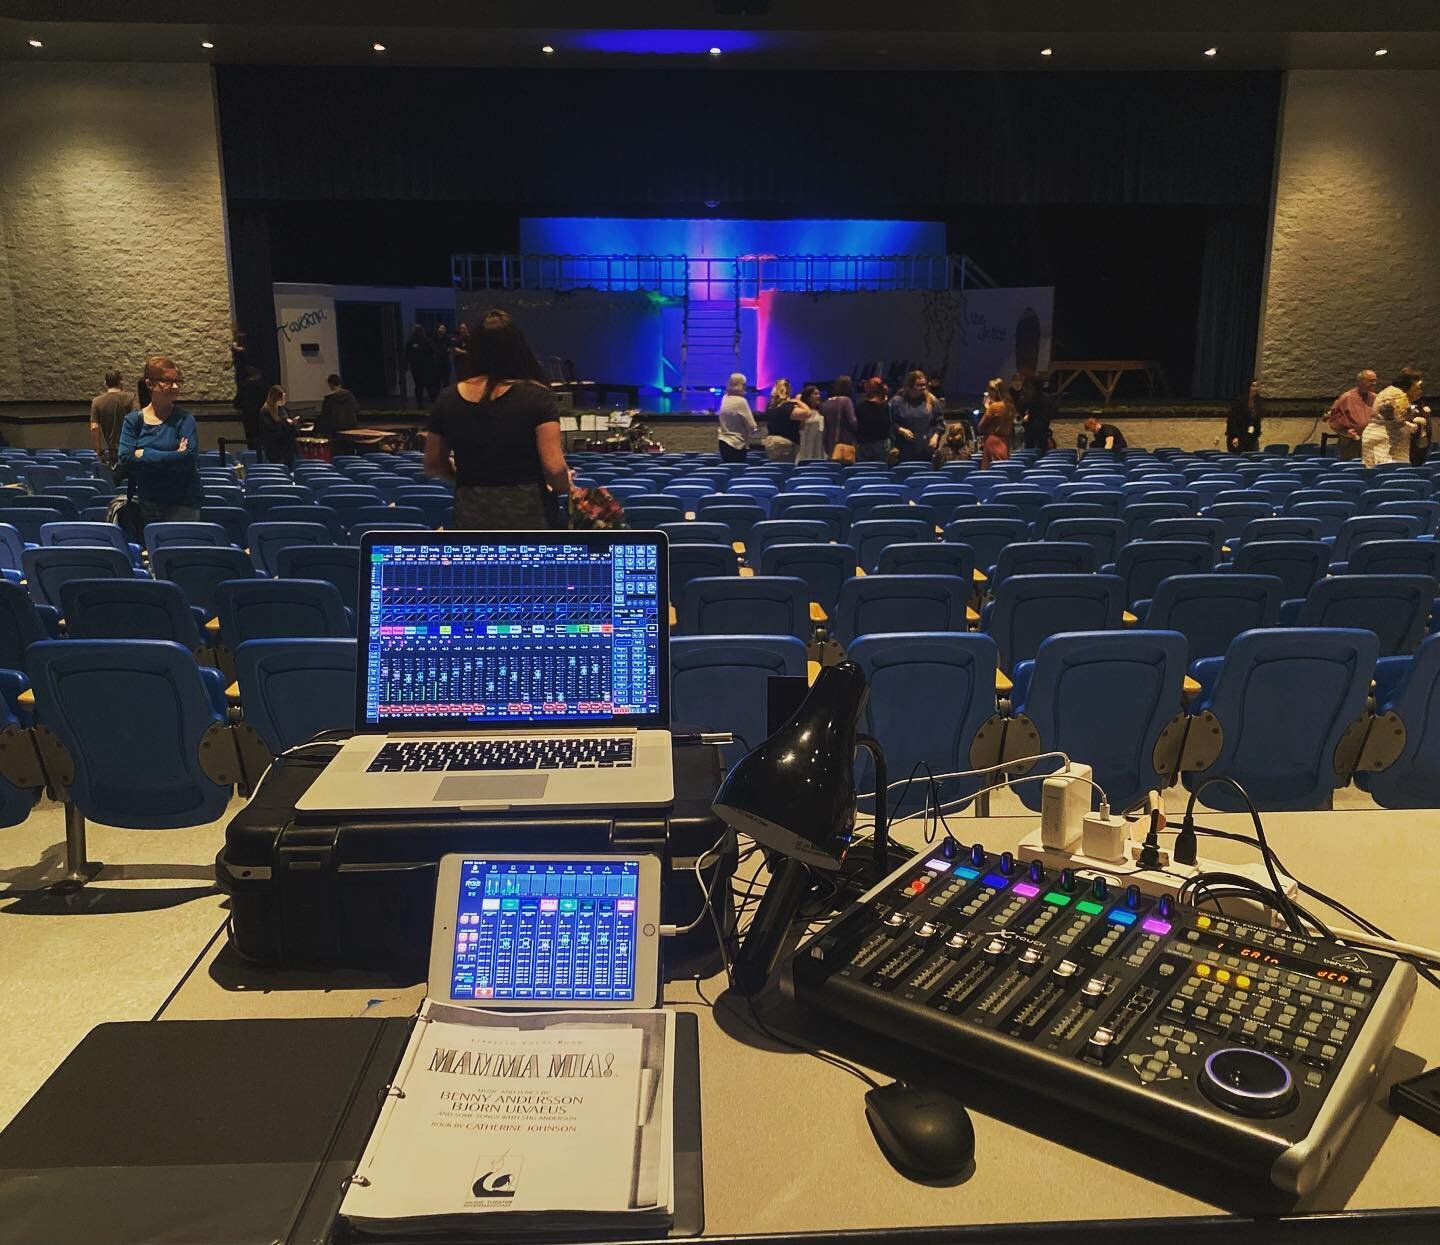 We had a great week running and assisting with sound at Lebanon HS and Ravenwood HS for their Spring Musical Productions!
.
.
.

#MAS #masonaudiosolutions #audioengineer #mixingengineer #masteringengineer #audio #acoustics #audioproduction #logicprox